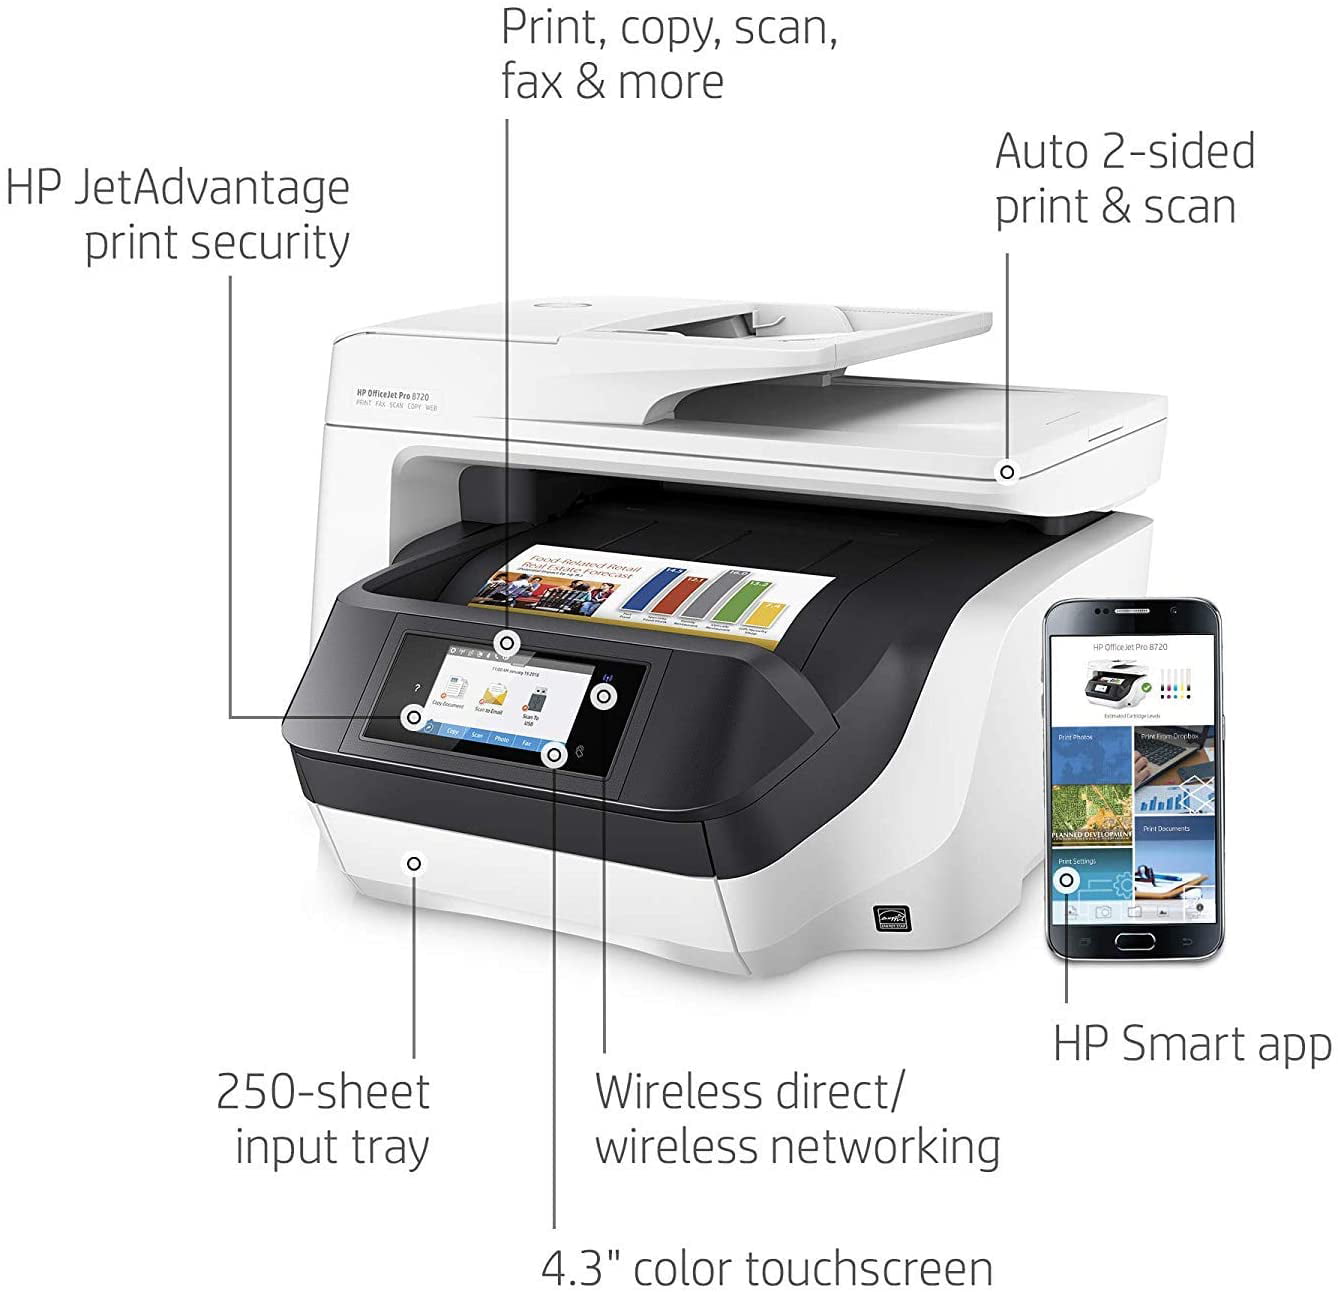 HP OfficeJet Pro 8720 All-in-One Wireless Color Printer, HP Instant Ink or   Dash replenishment ready - White (M9L75A)